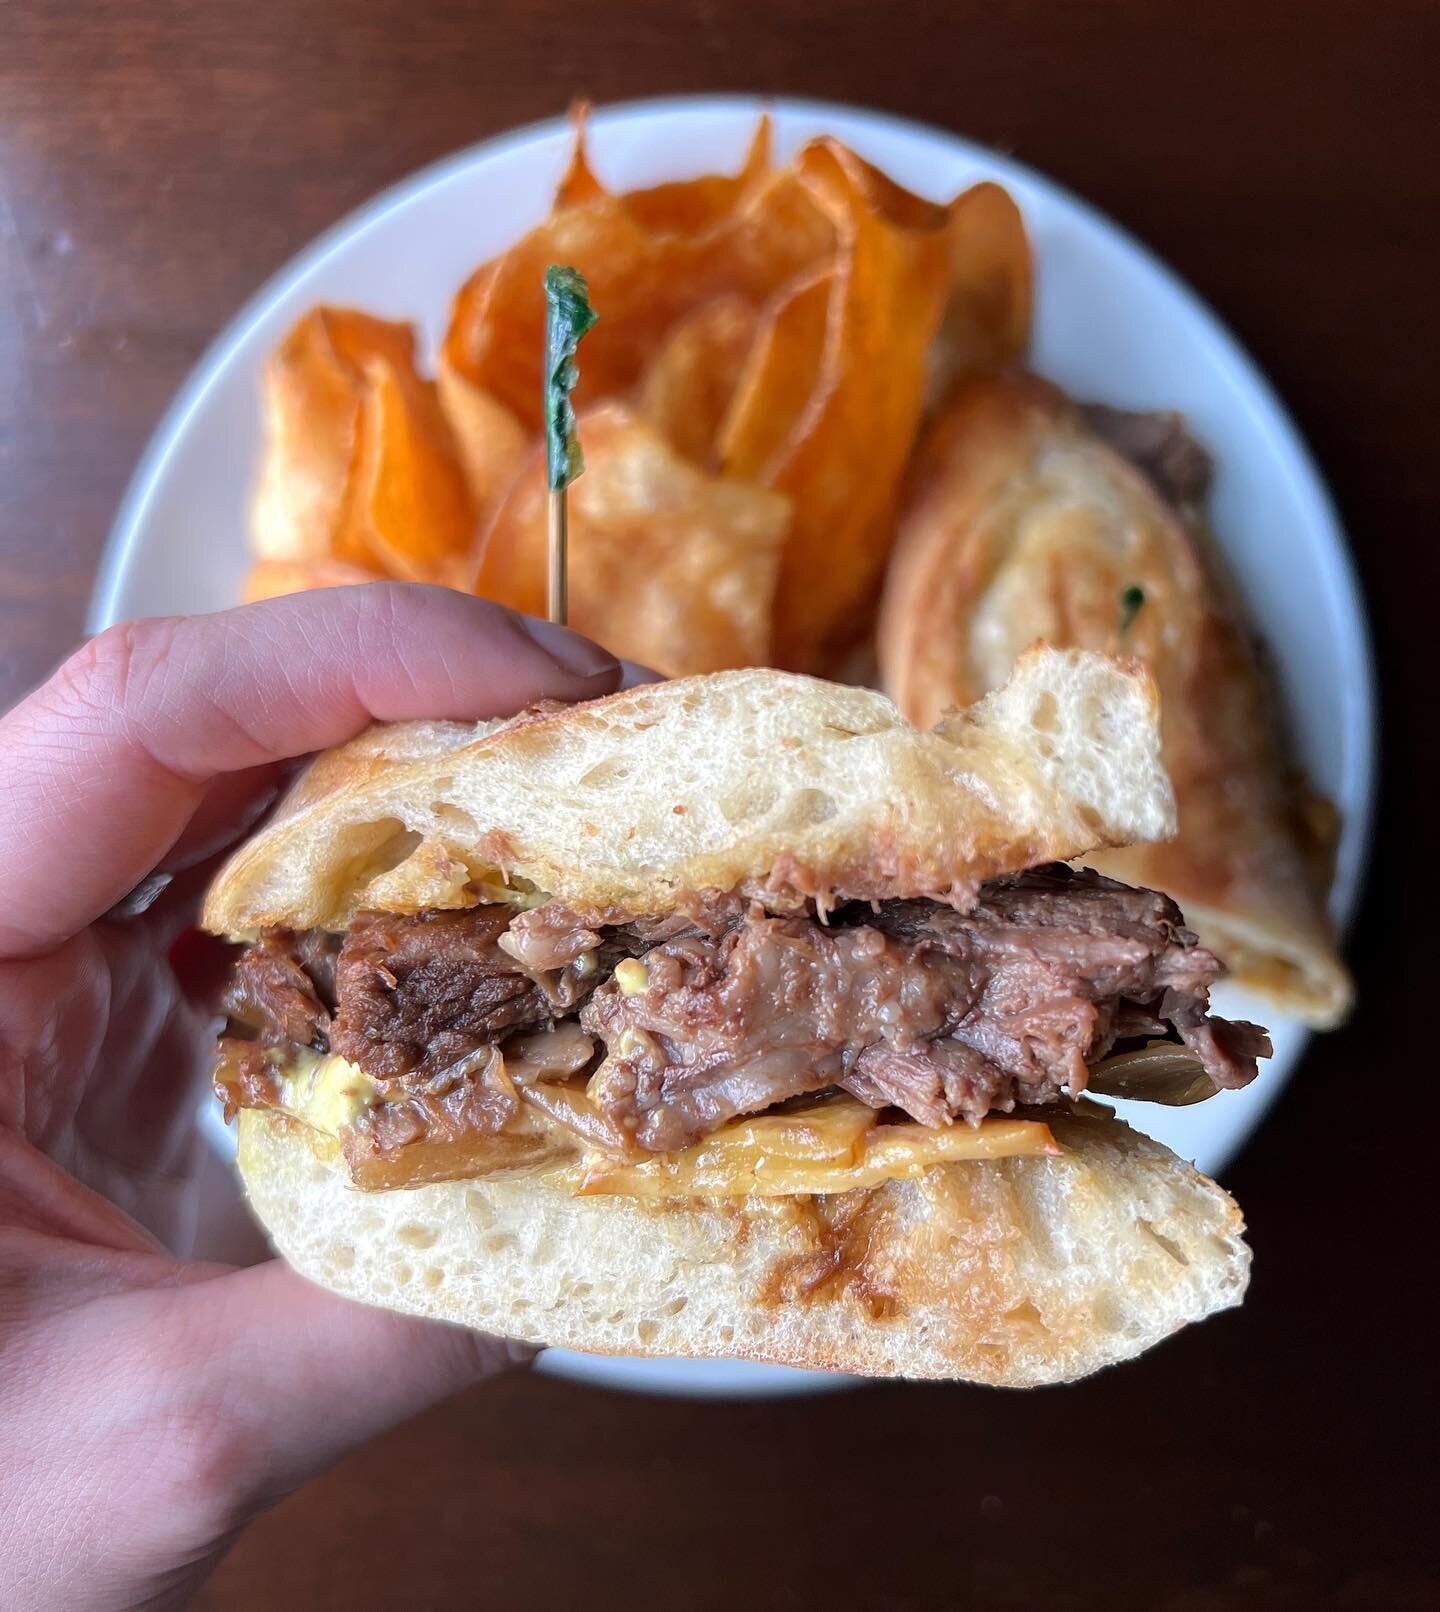 Grilled cheese + short rib = heaven 😍 on the specials this week SEAN&rsquo;S SHORT RIB GRILLED CHEESE Shredded braised boneless short rib topped with smoked gouda and saut&eacute;ed onions and Dijon horseradish sauce on a grilled French baguette